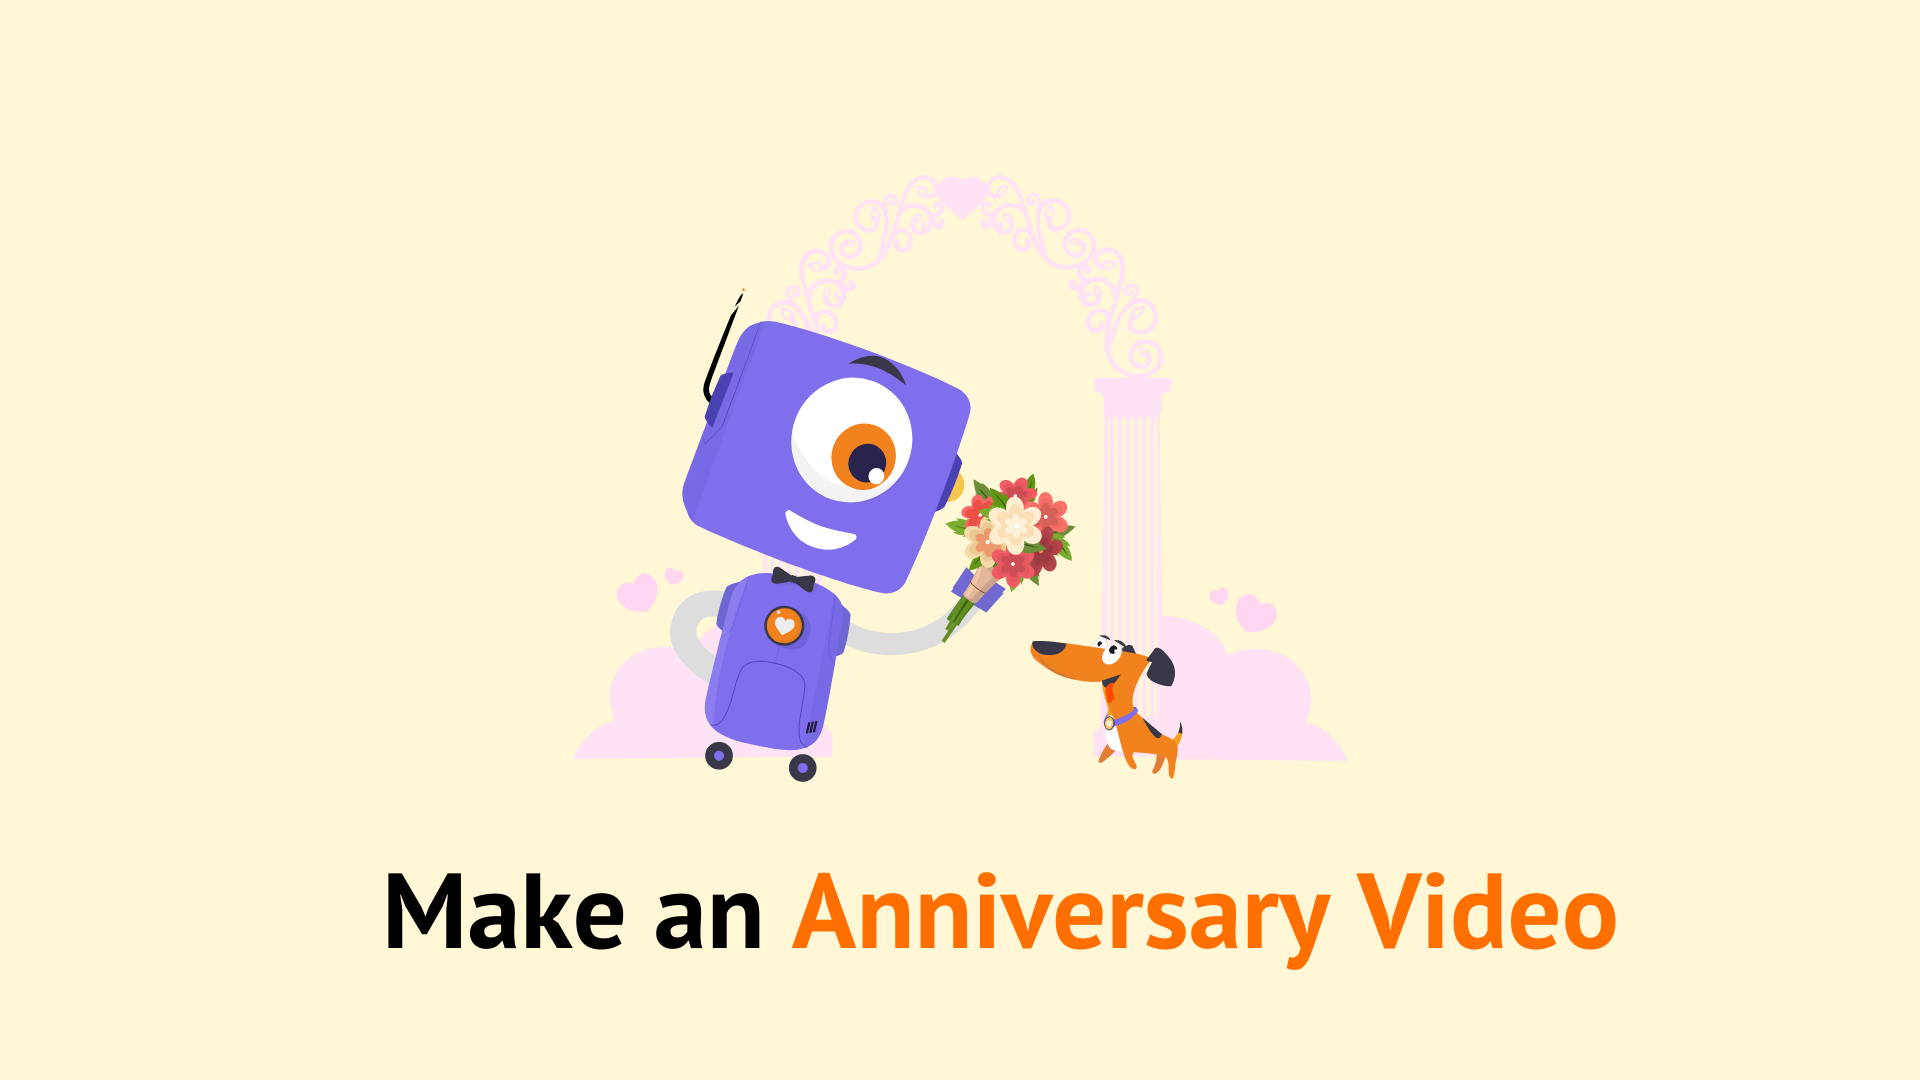 Holiday video maker